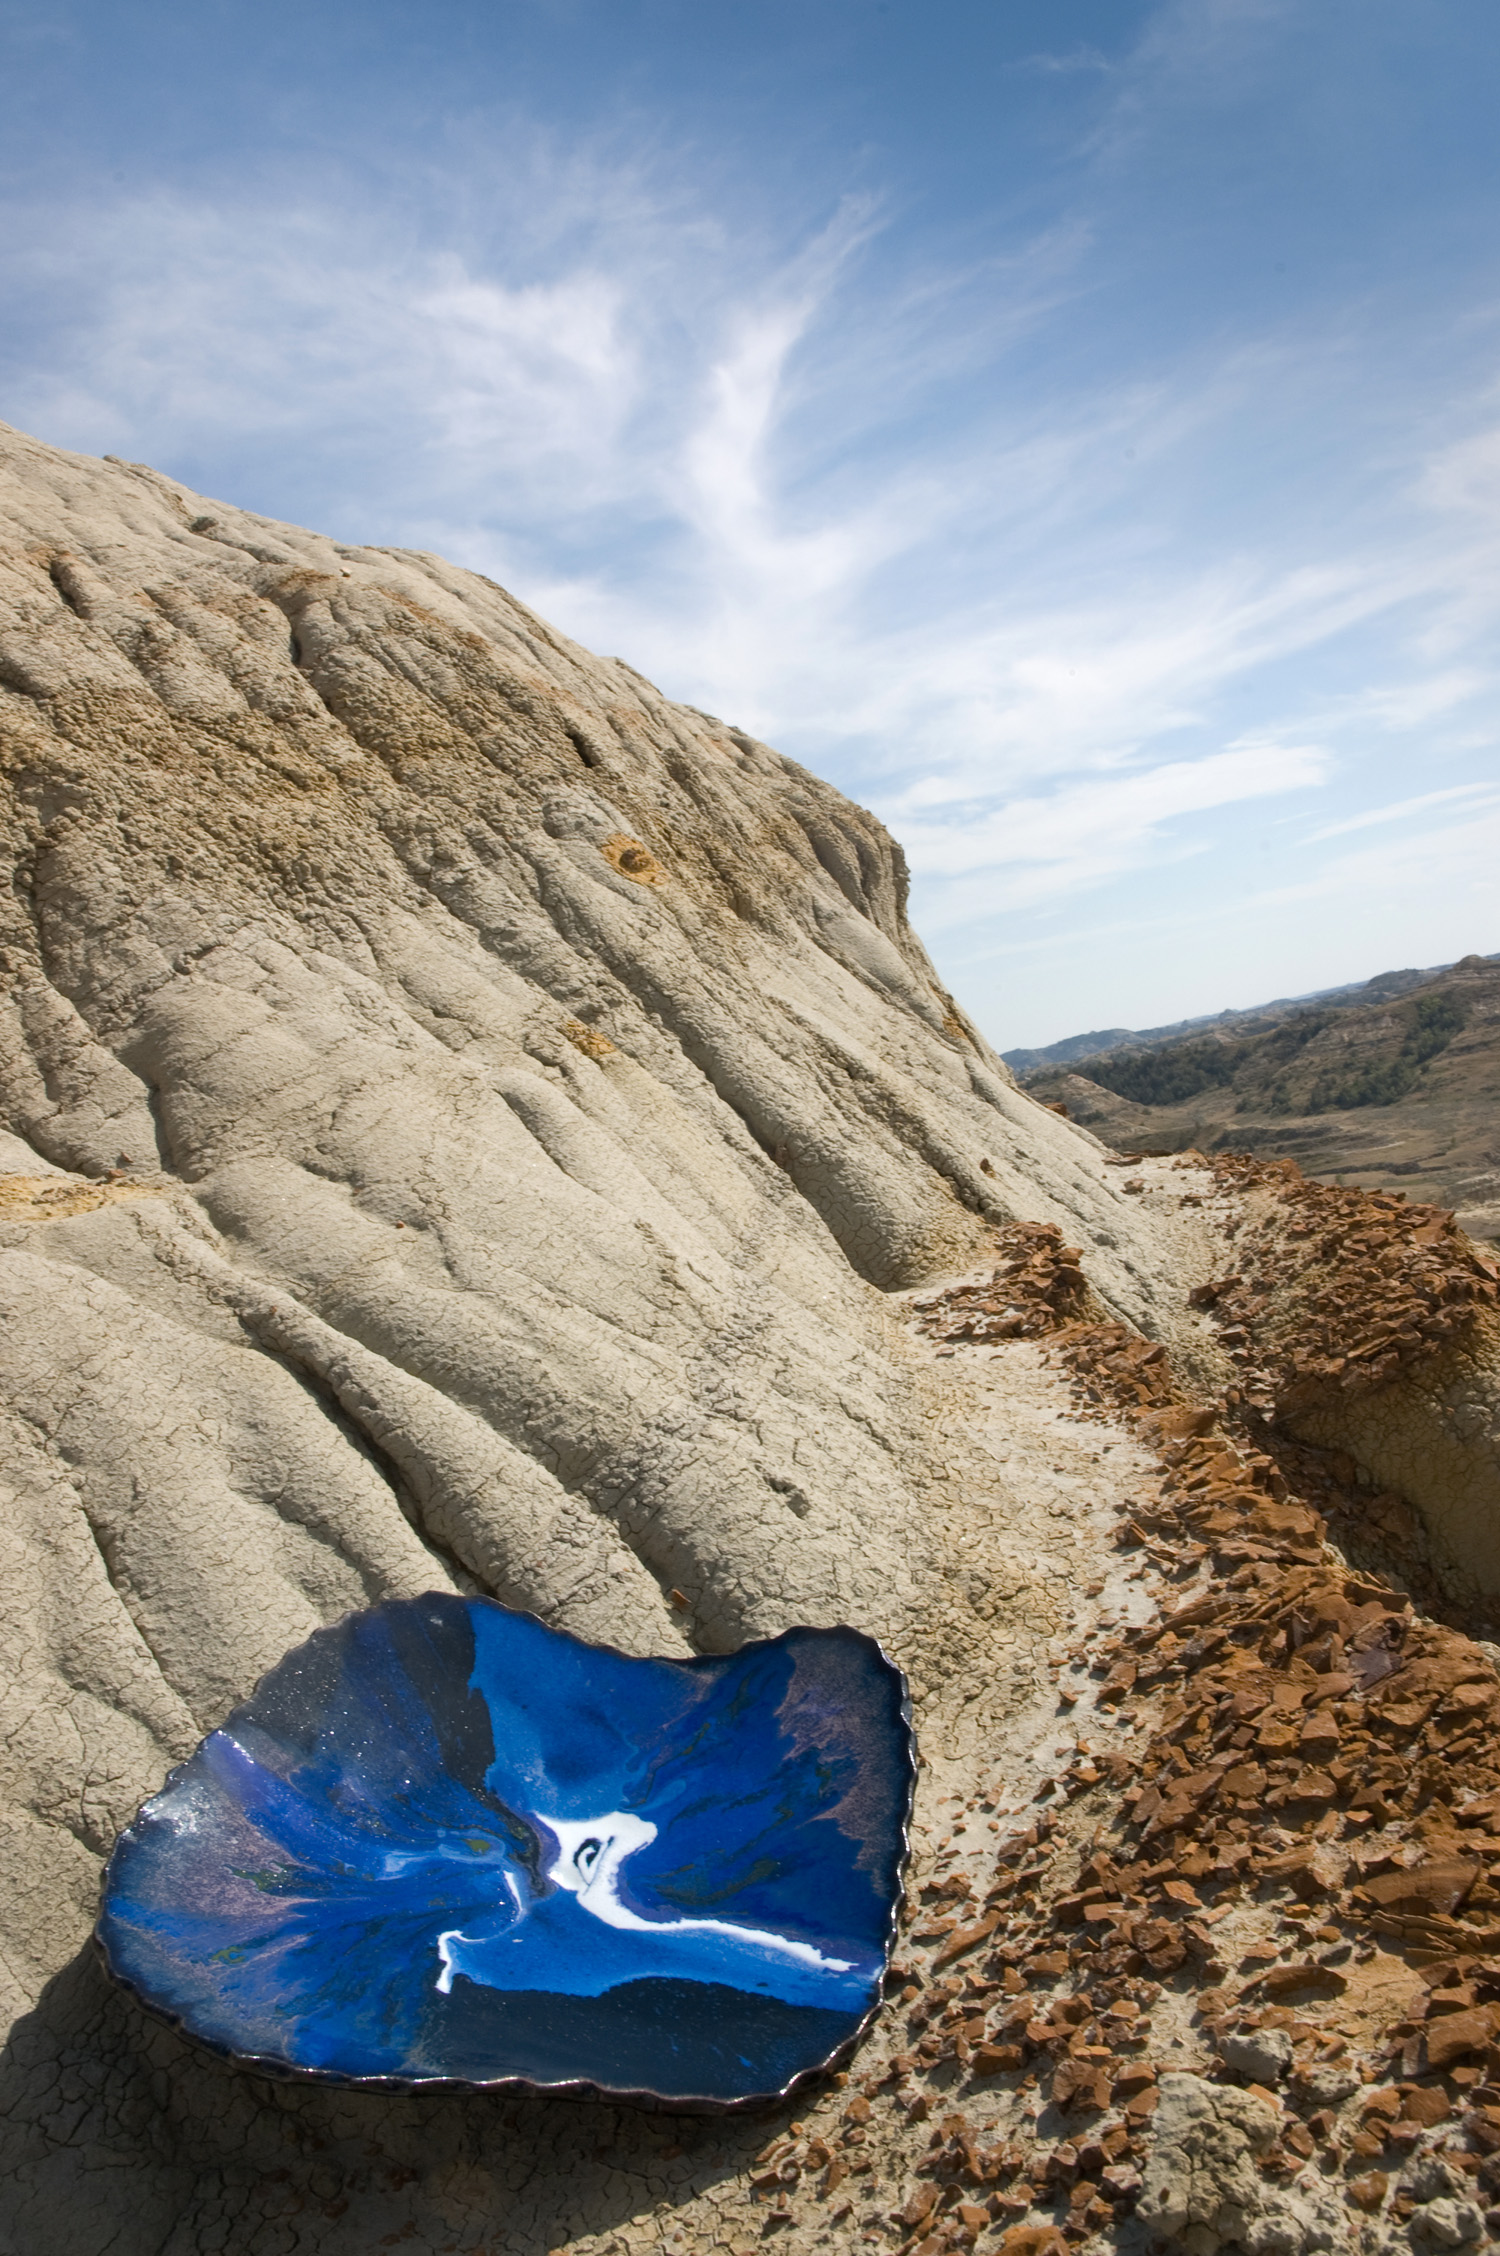 Smith's work reflects the badlands locale in which it's created